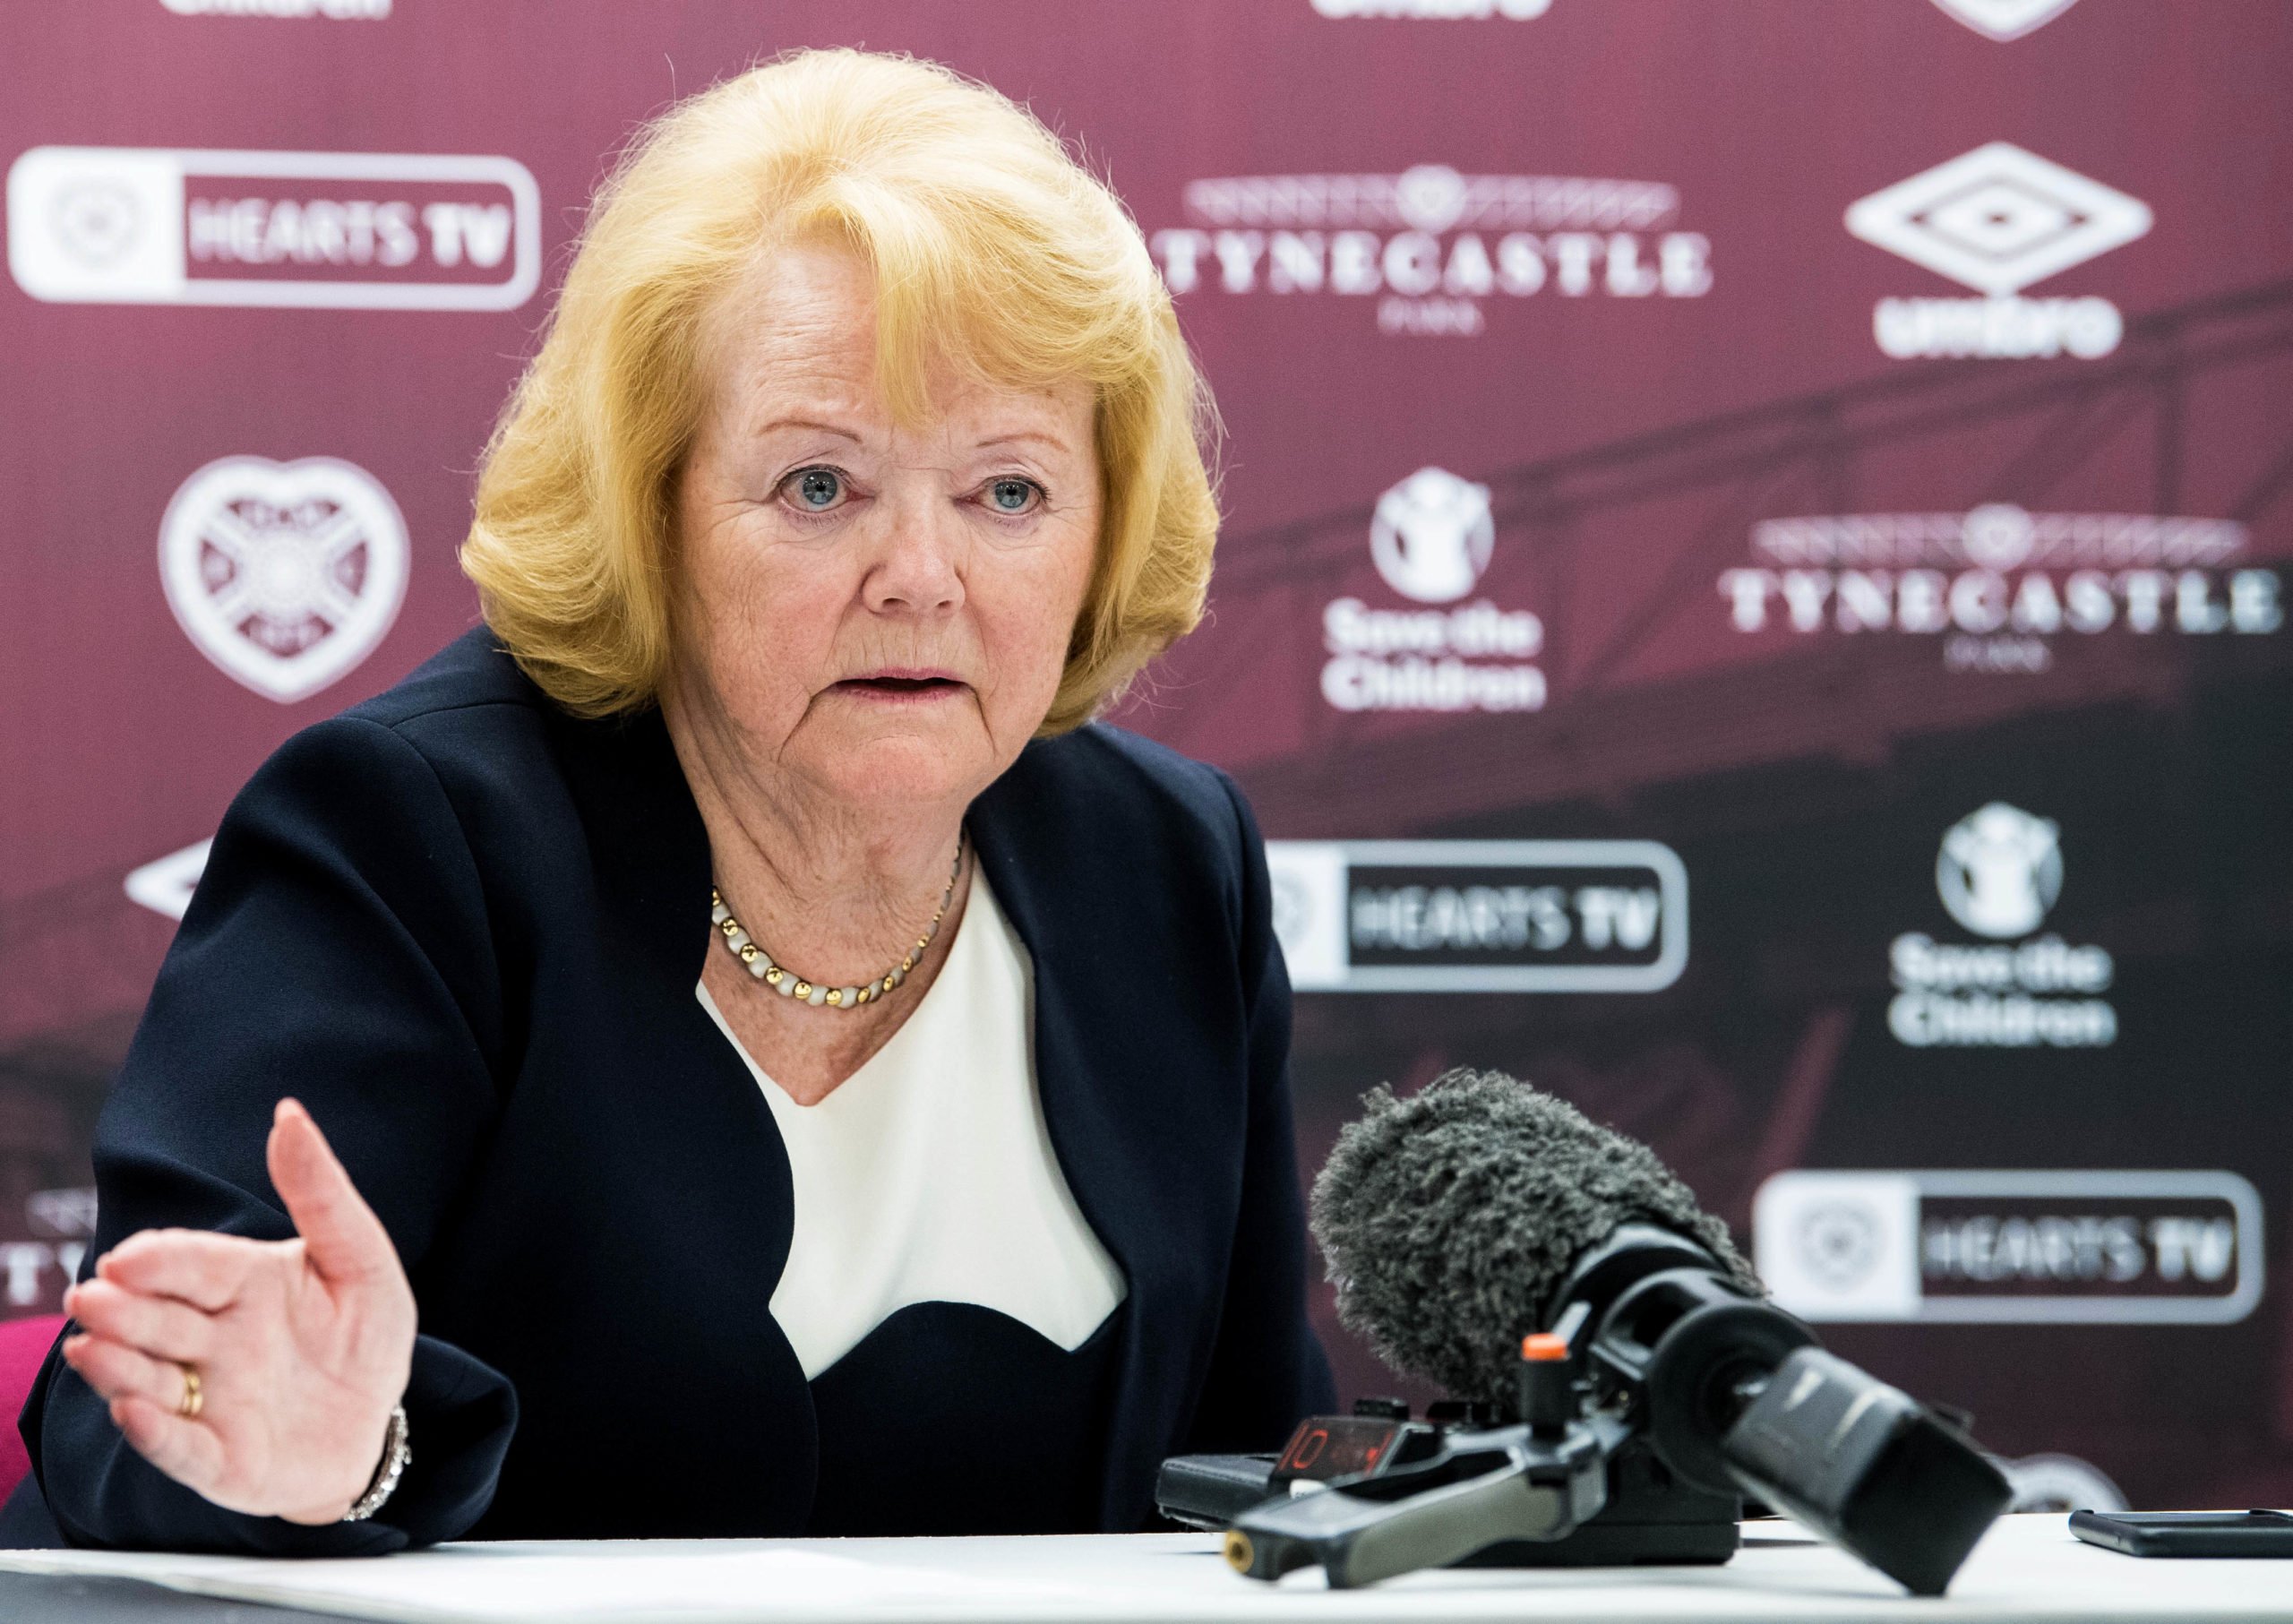 Budge splashes out "considerable expense" to help Hearts prepare for Celtic clash